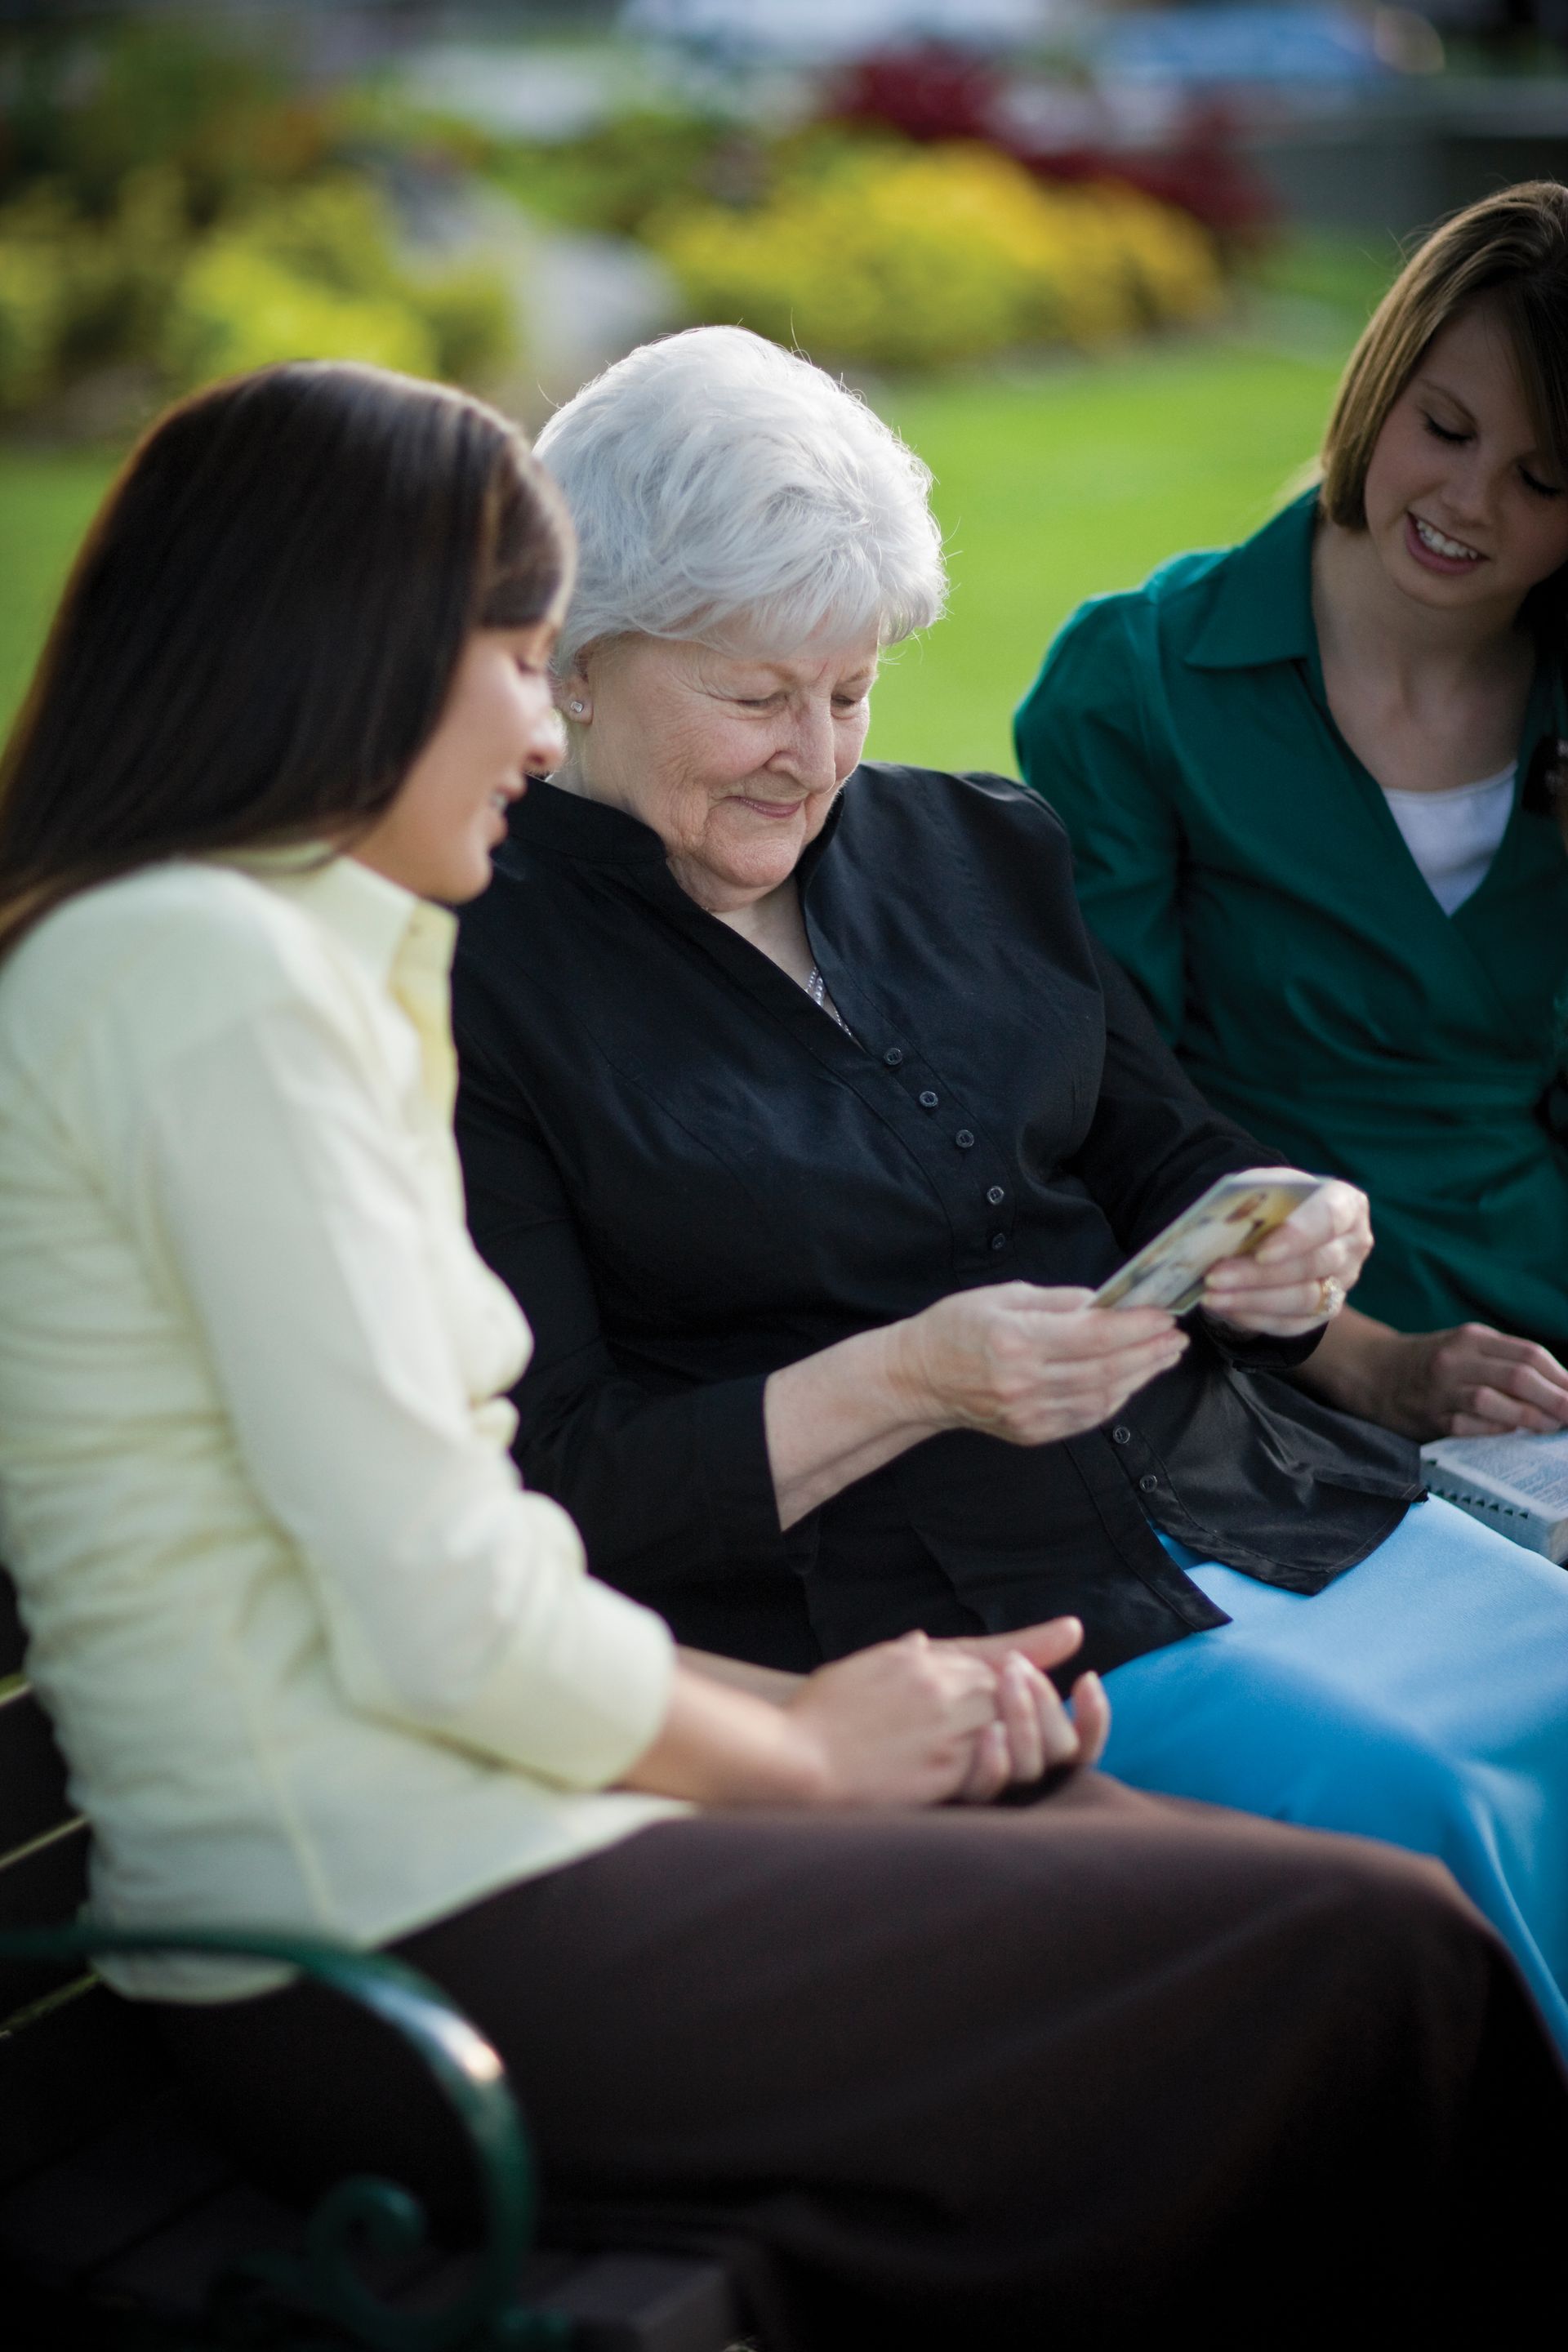 Sister missionaries giving a pass-along card to an elderly woman.